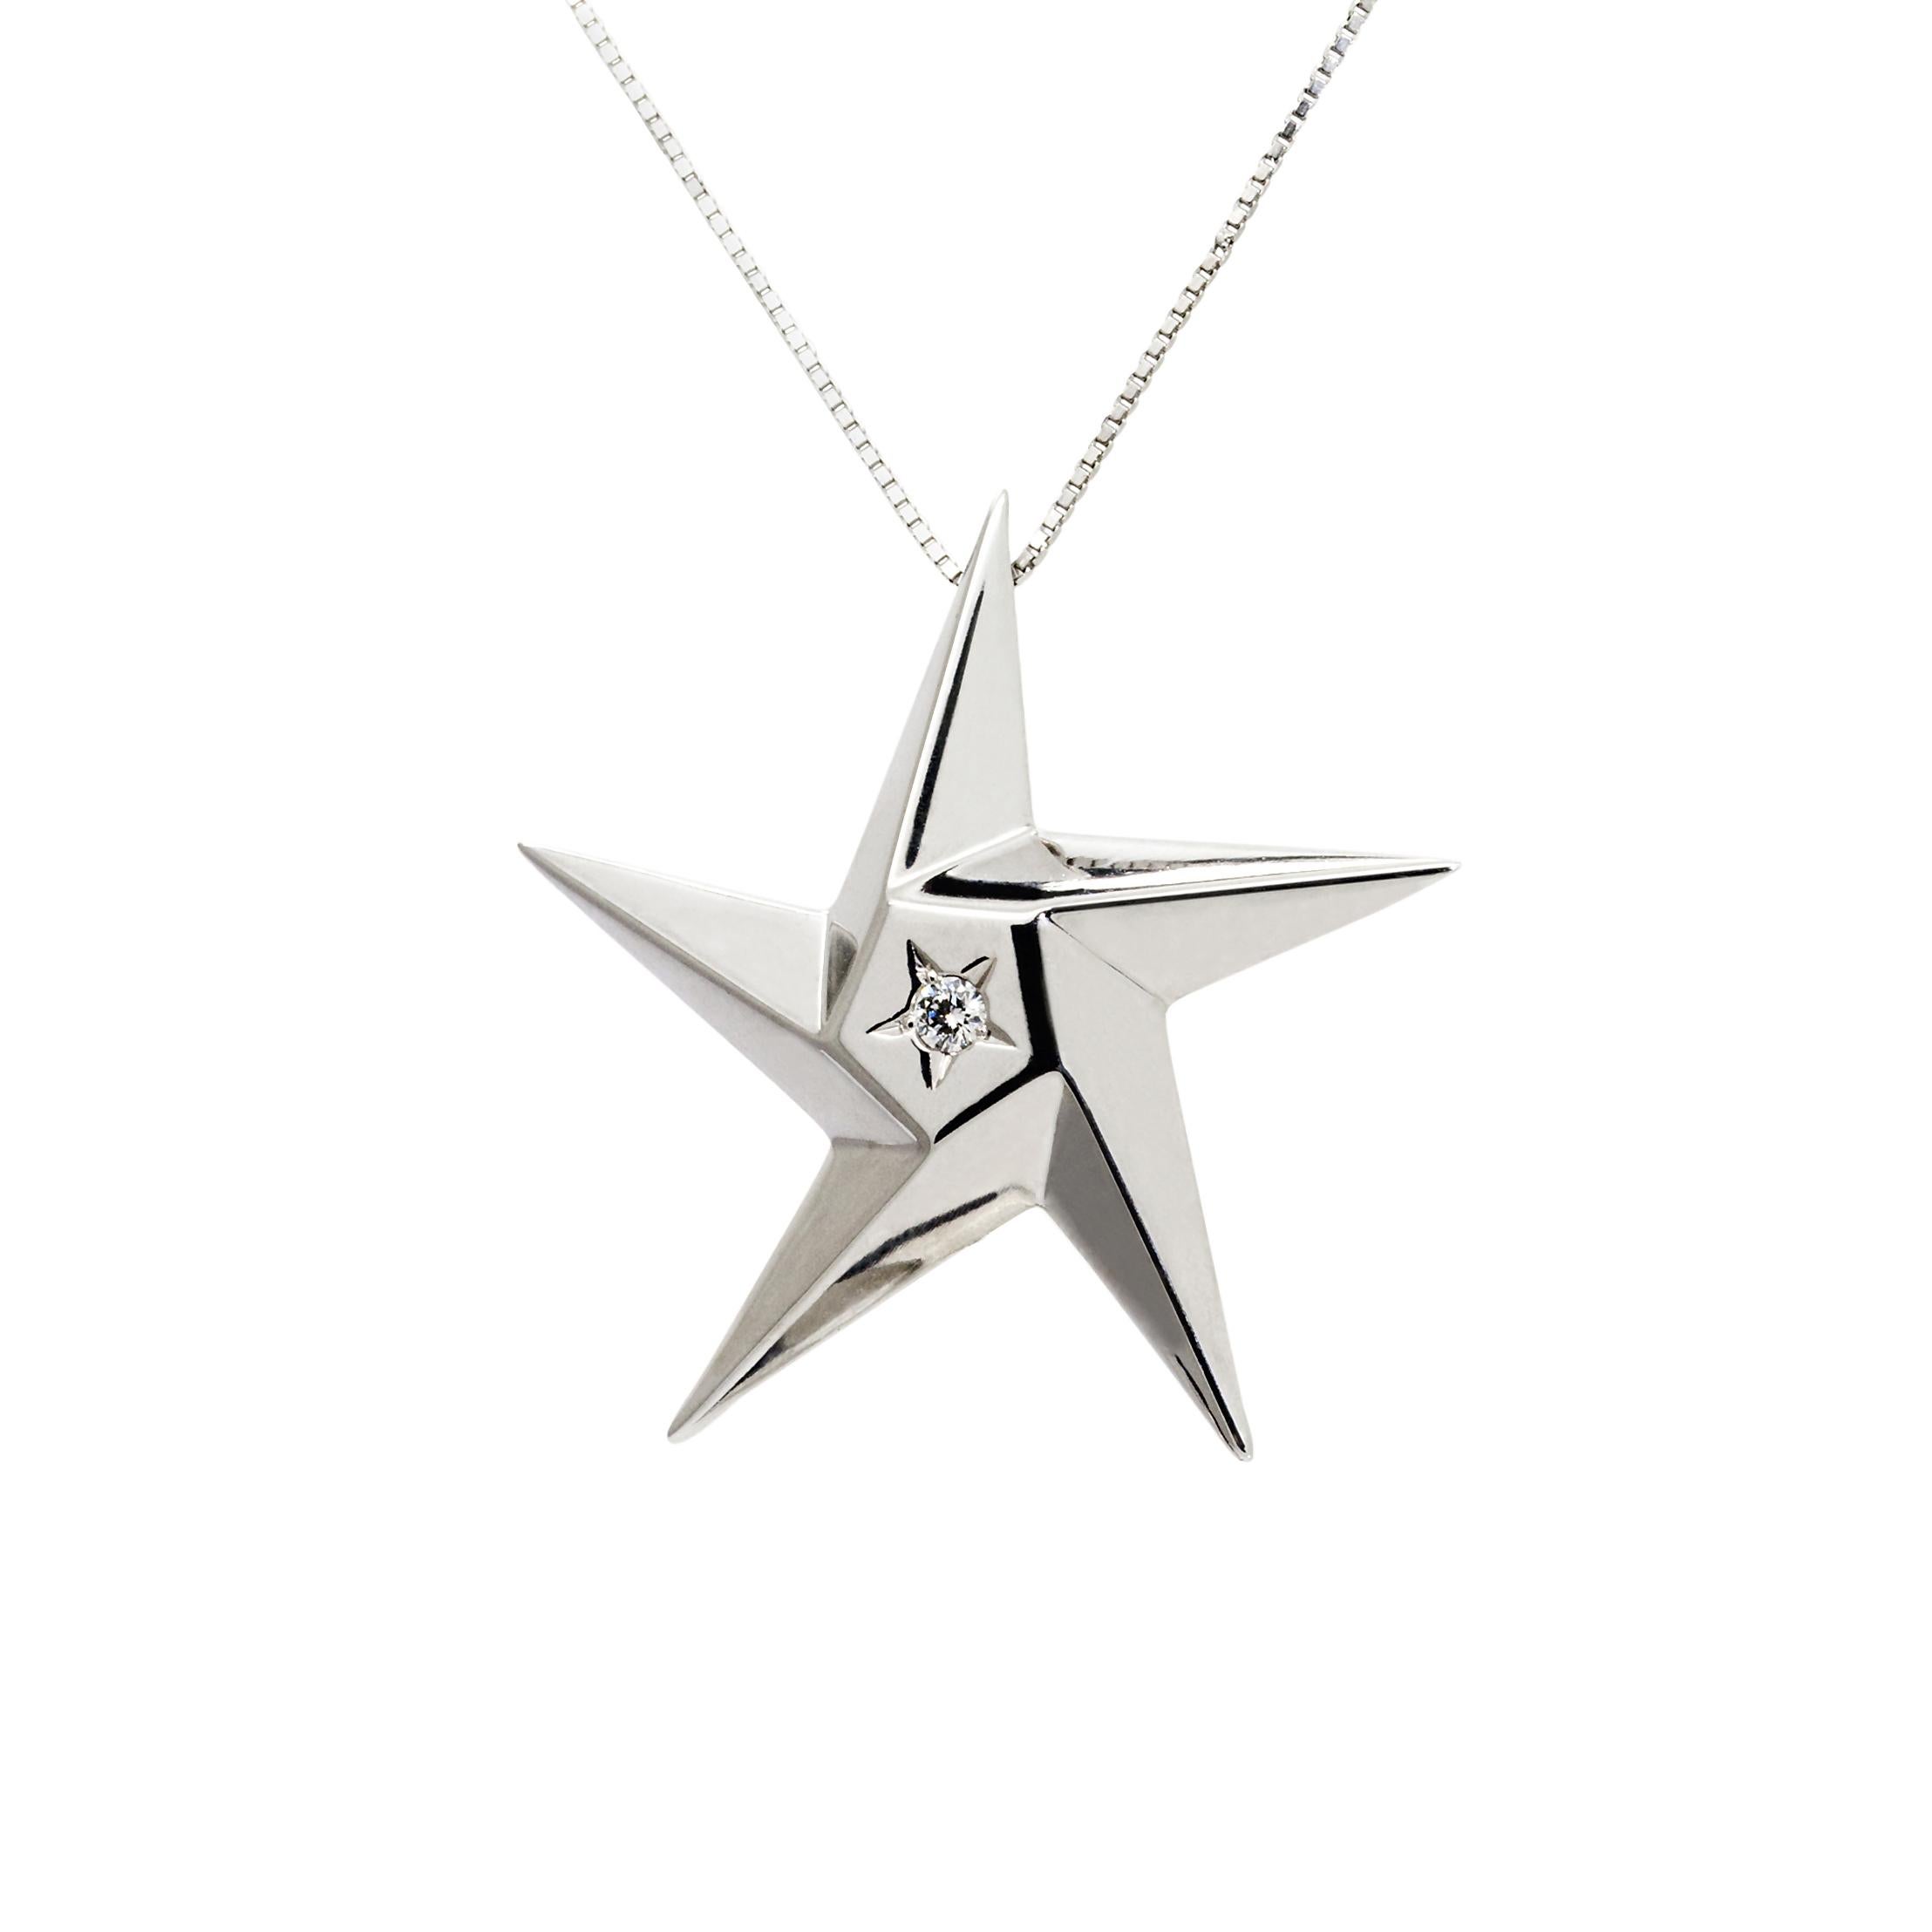 Daou  Diamond Star Necklace in White Gold a collar choker style necklace  For Sale 3